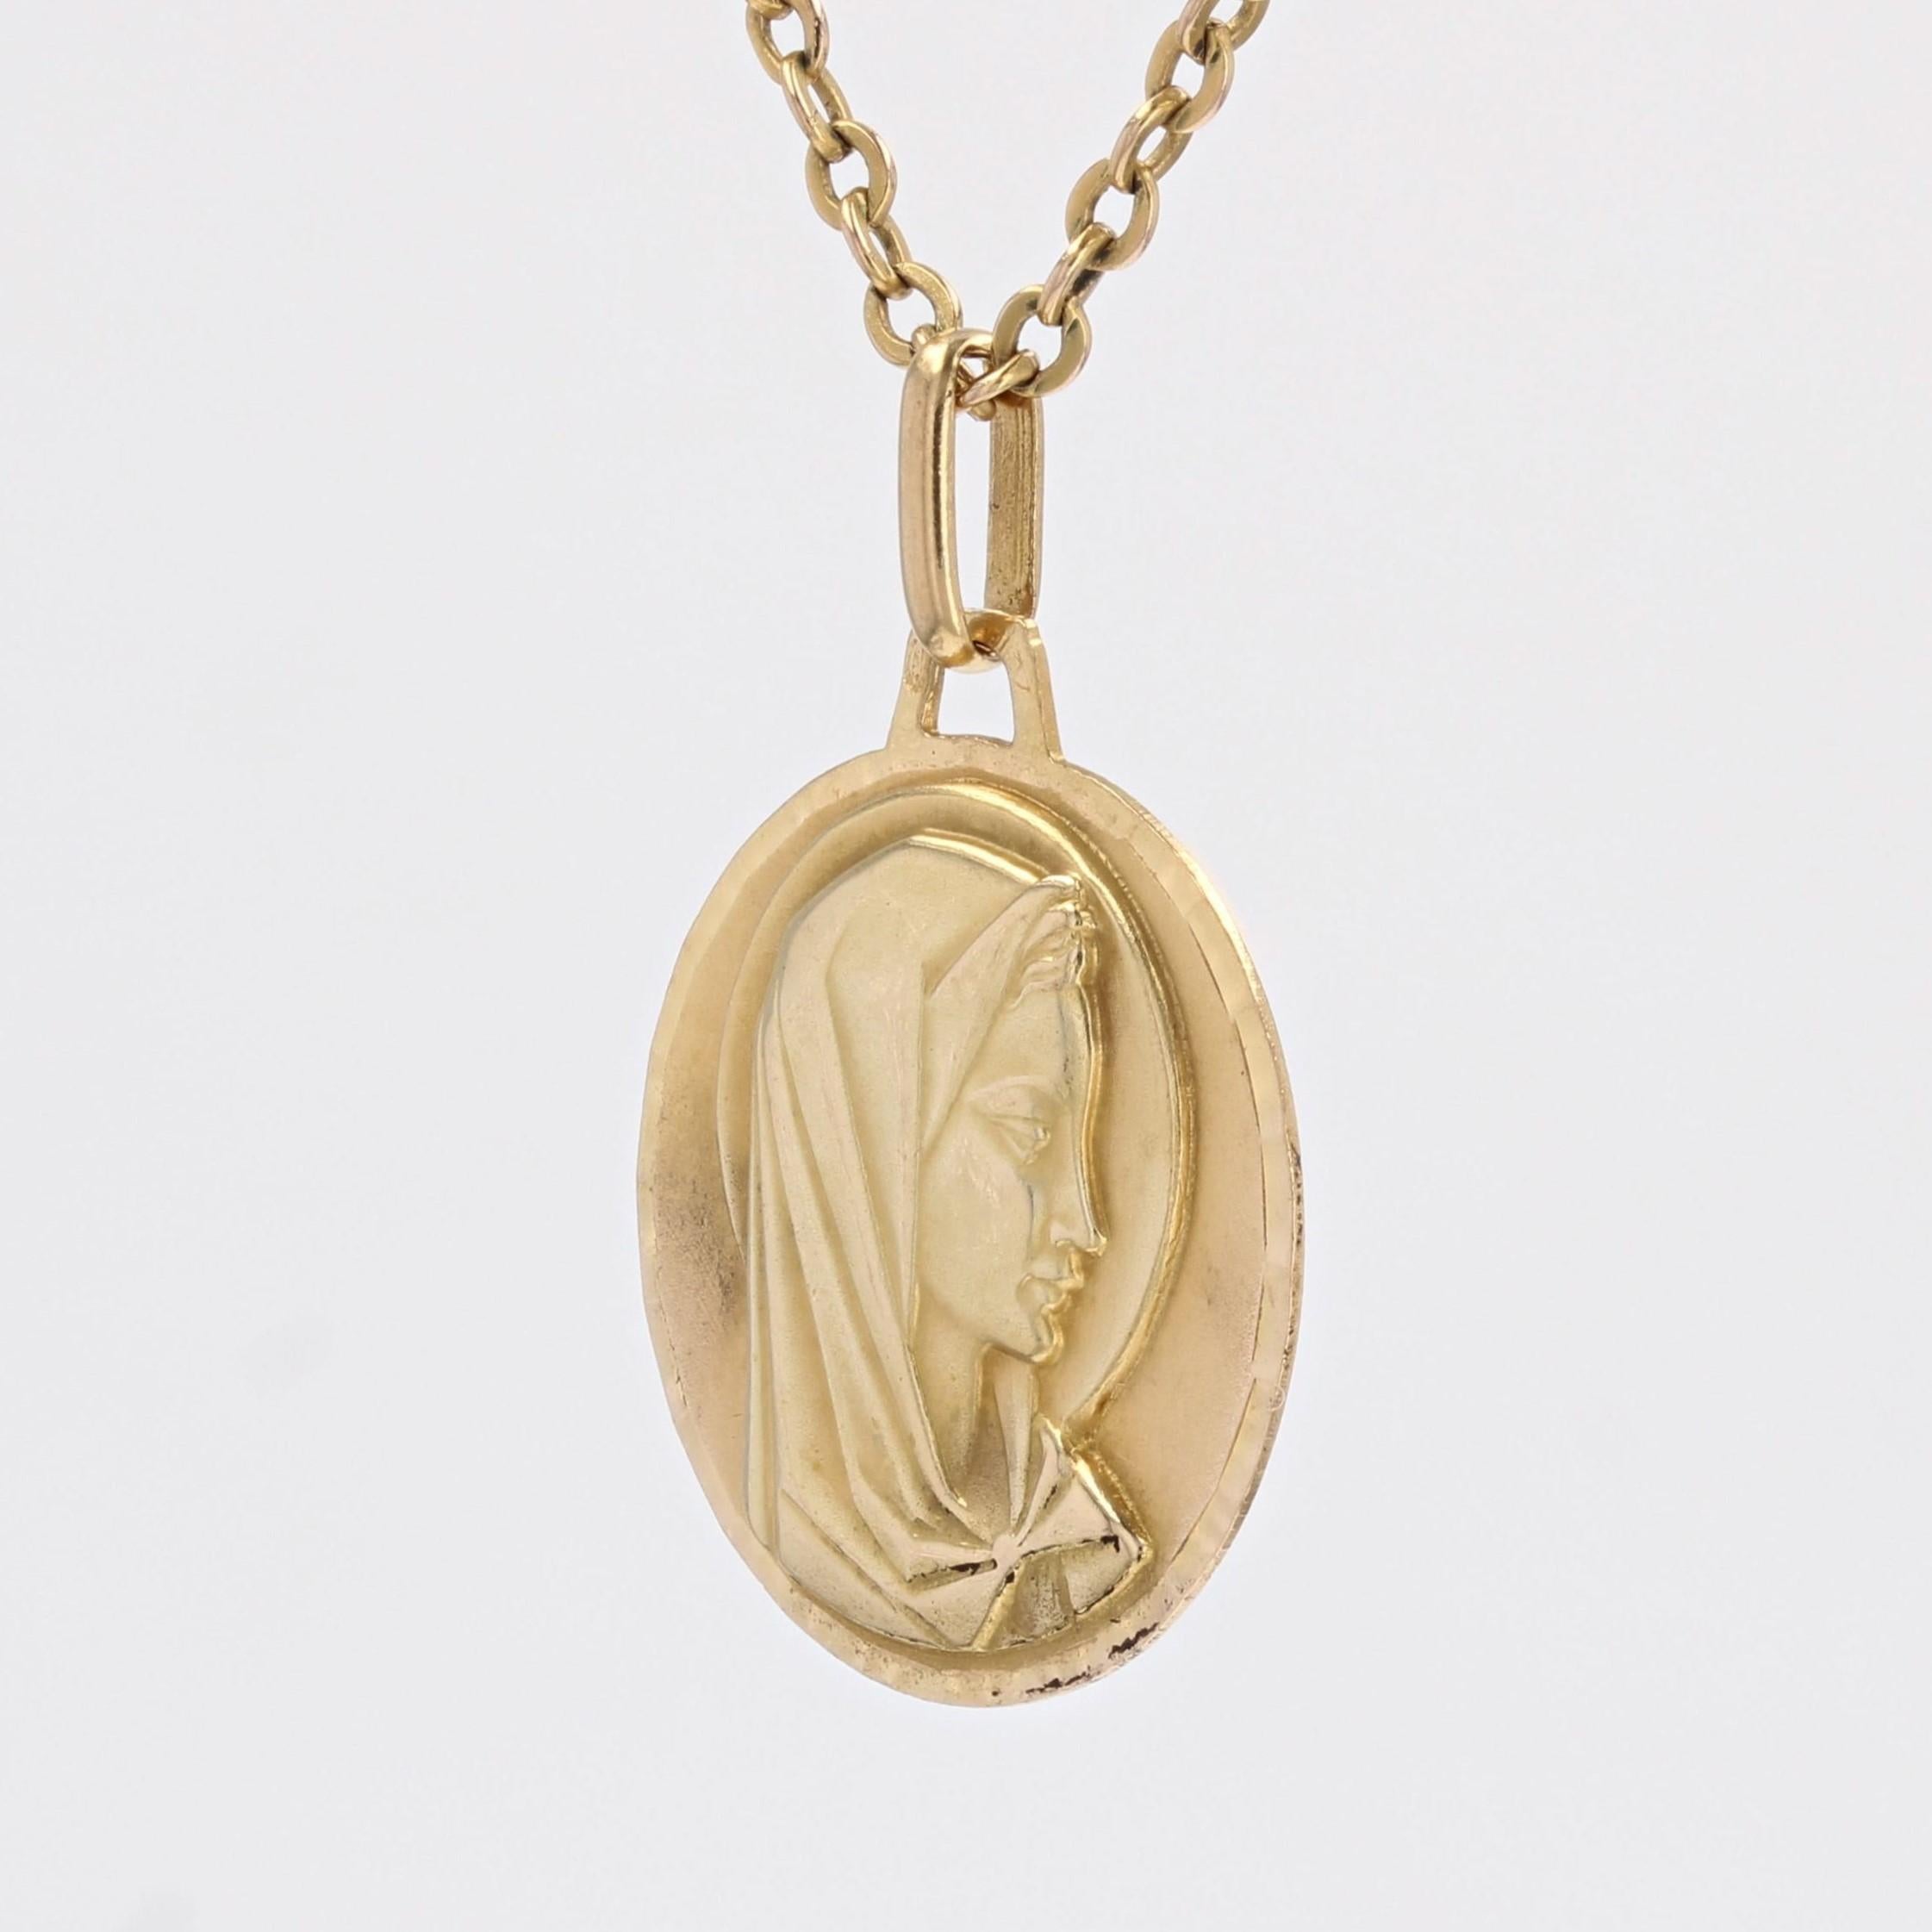 Belle Époque French Antique 18 Karat Yellow Gold Virgin Mary Haloed Medal Pendant For Sale